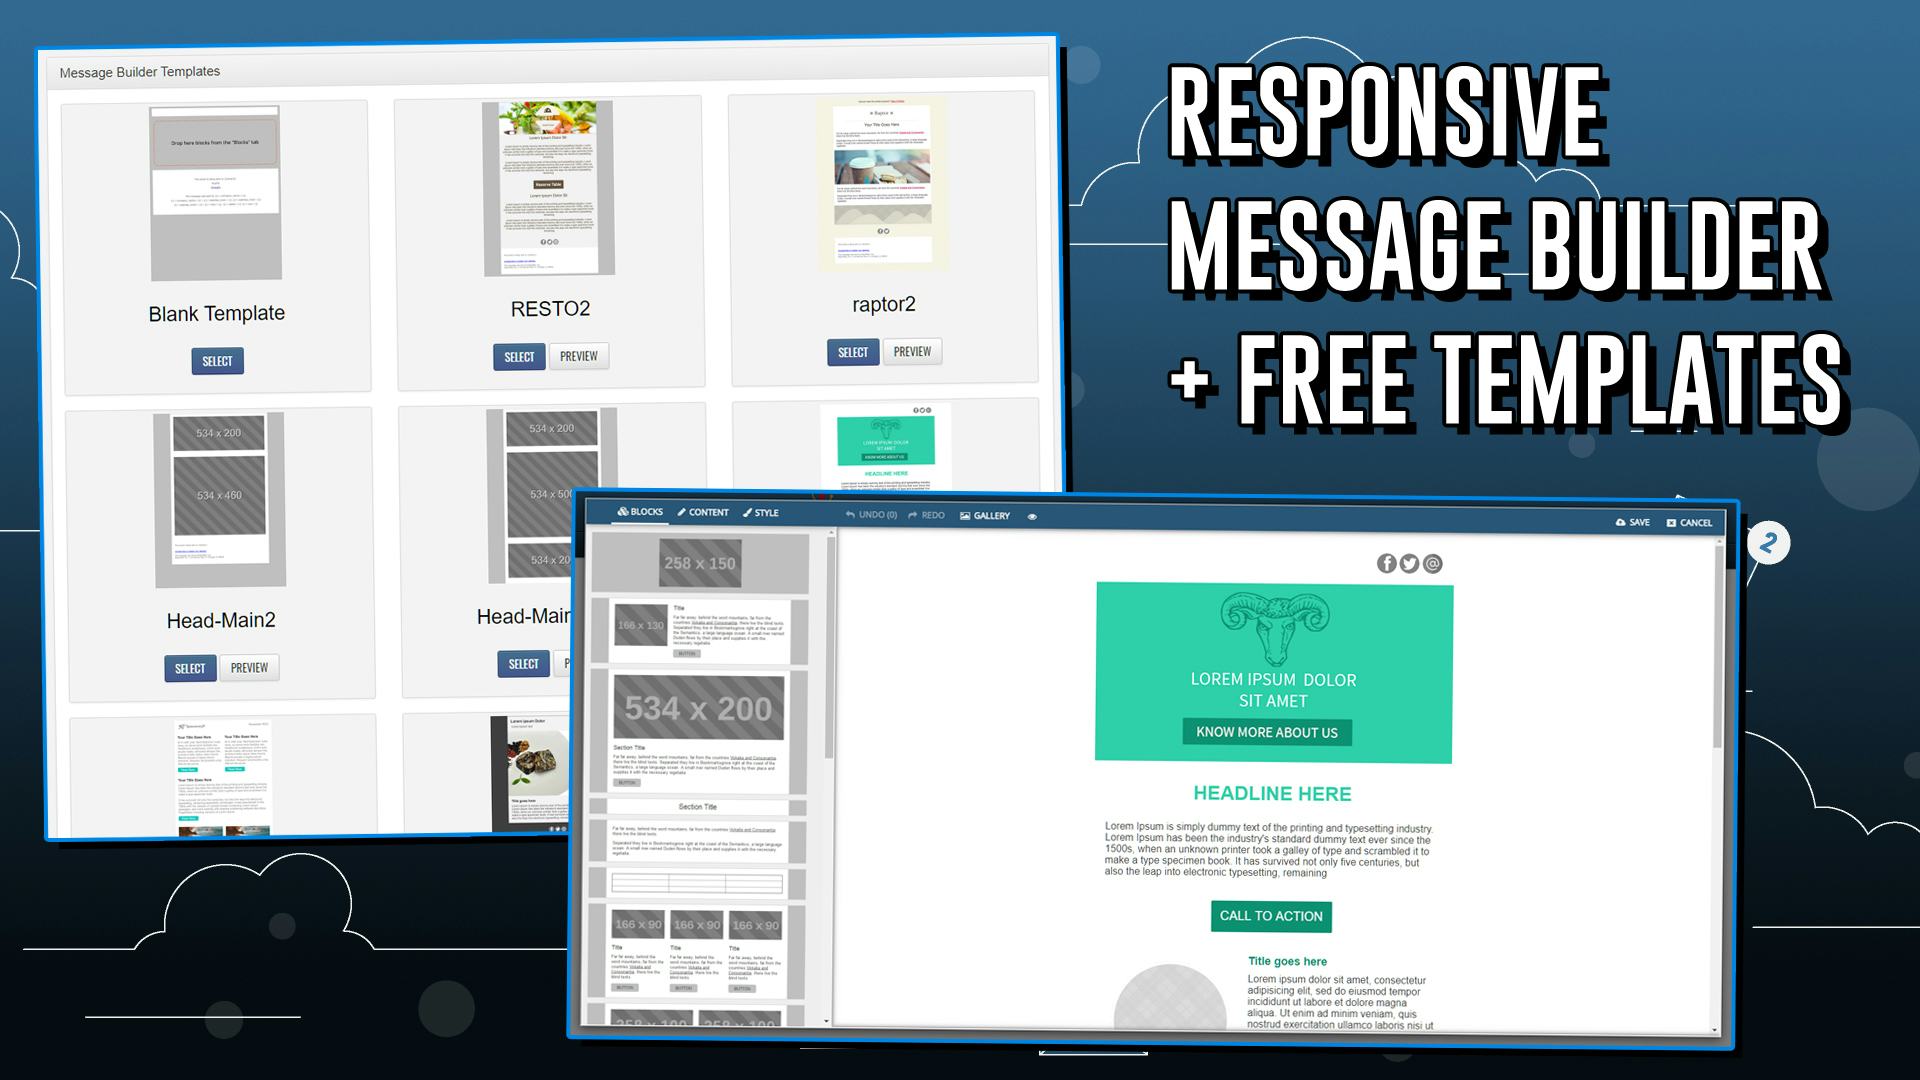 ReachMail Software - ReachMail message builder